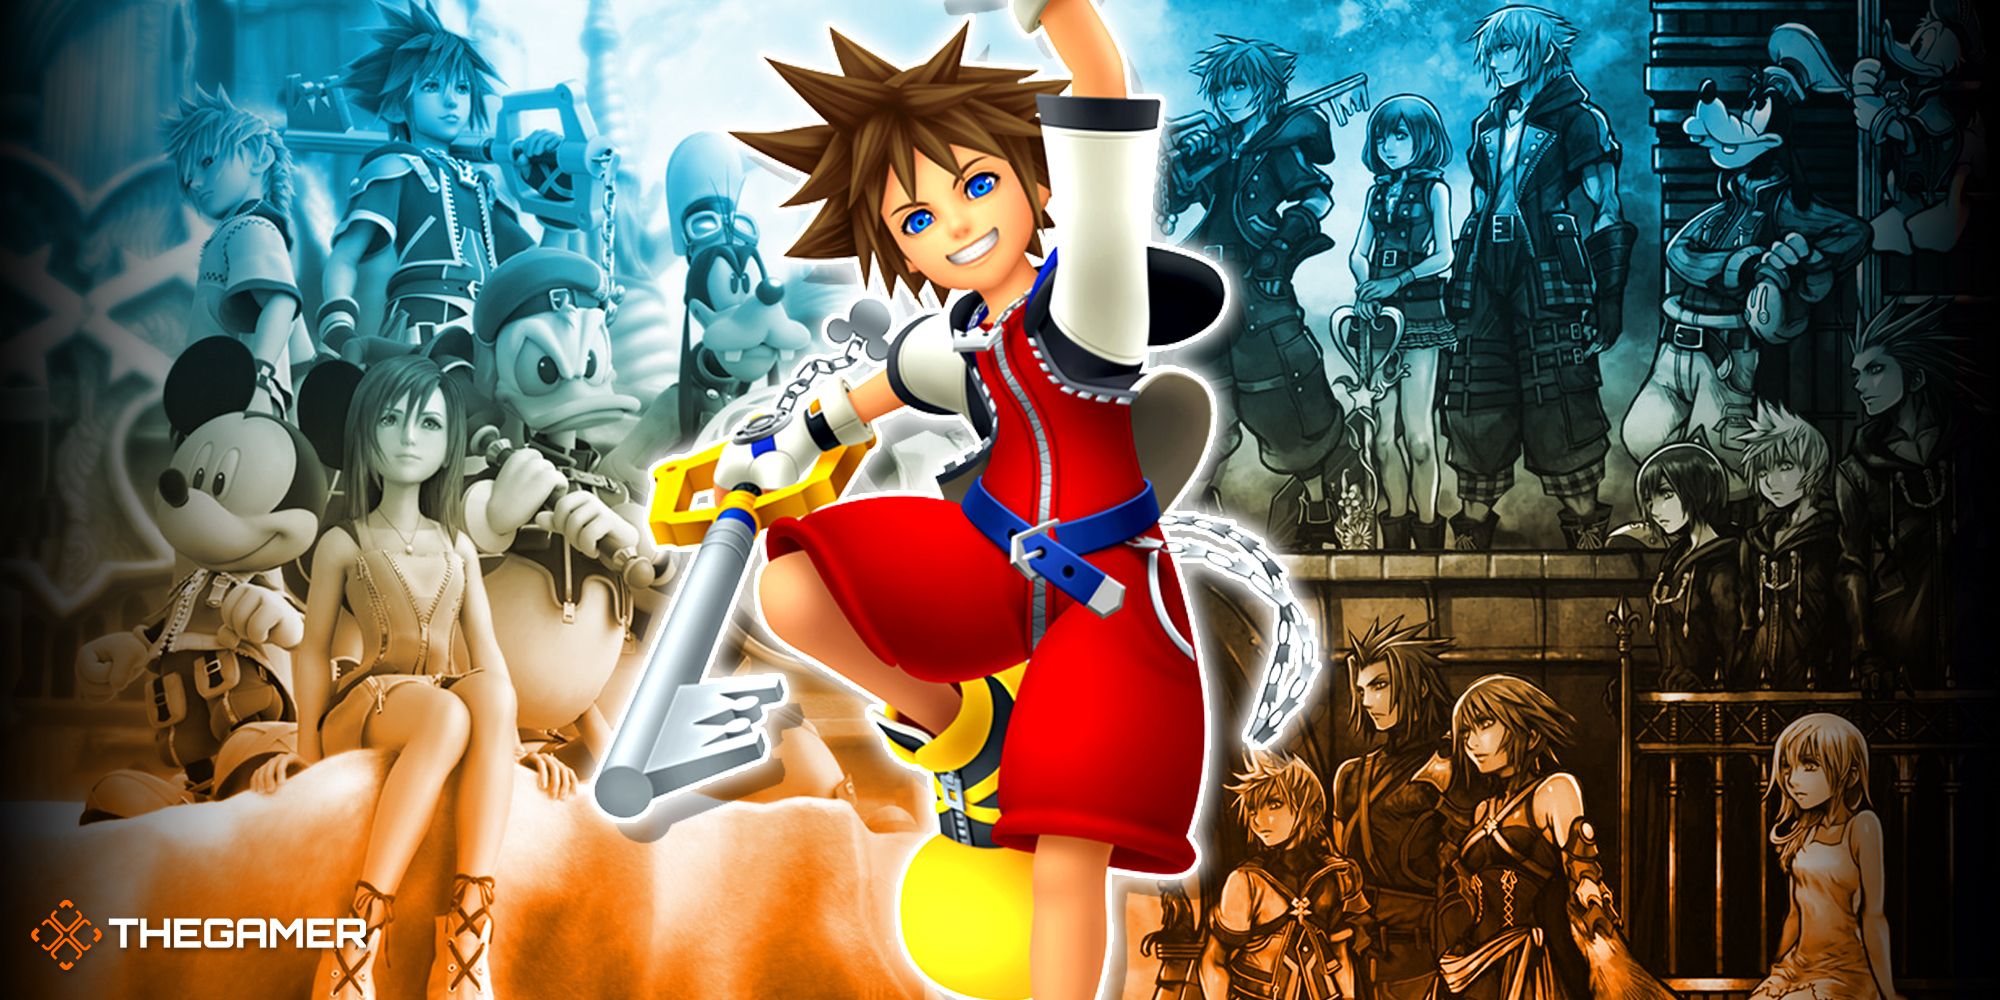 Sora in front a backdrop of several characters from Kingdom Hearts.